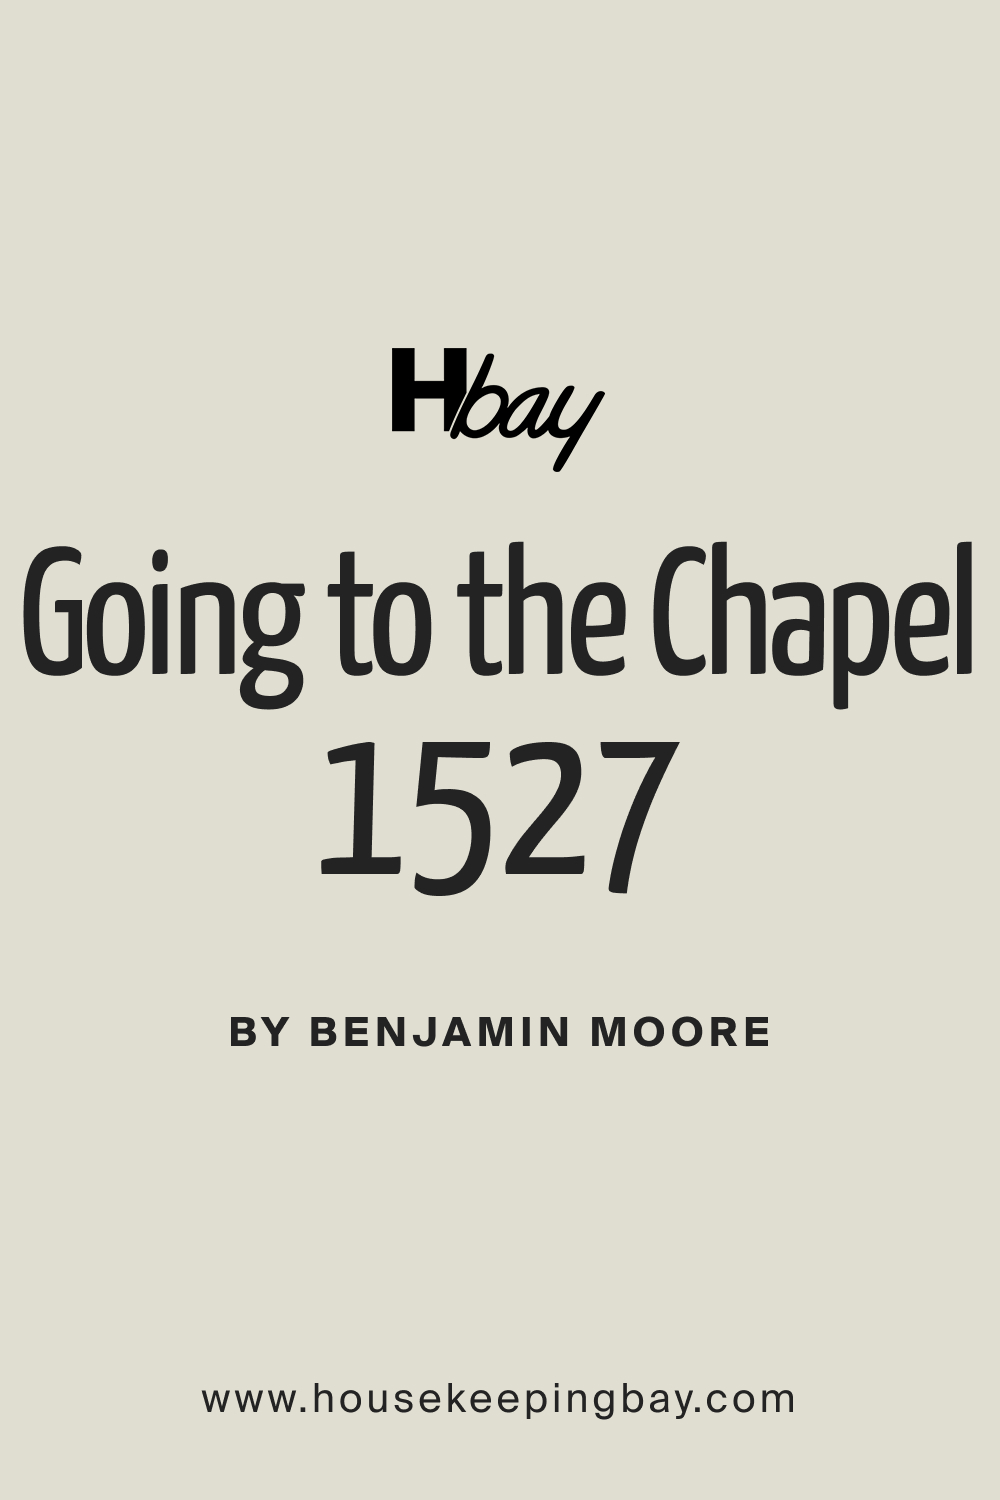 What Color Is BM Going to the Chapel 1527?